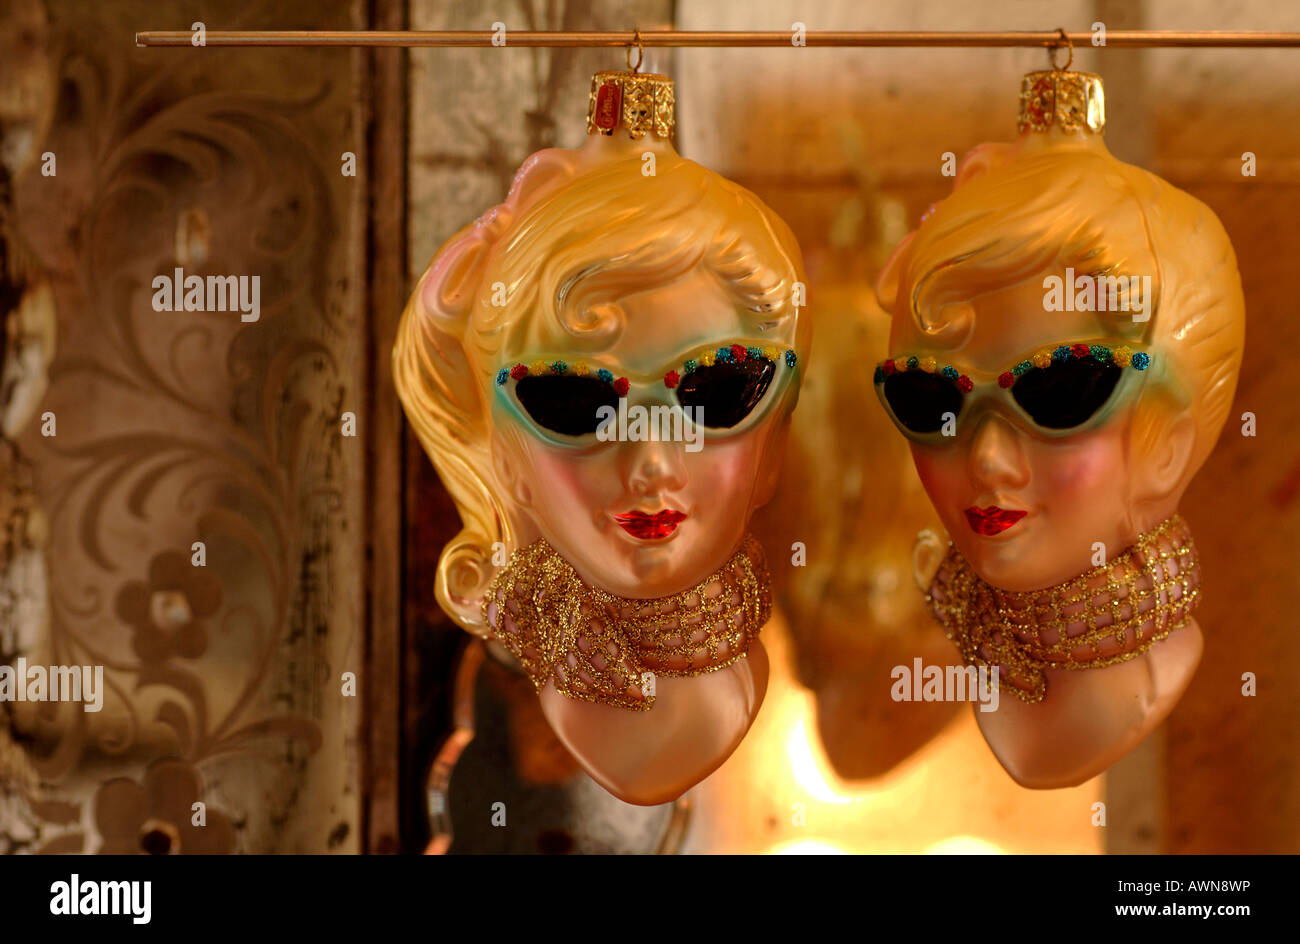 Retro ornaments from the 1950s featuring two blonde women wearing sunglasses and scarves Stock Photo